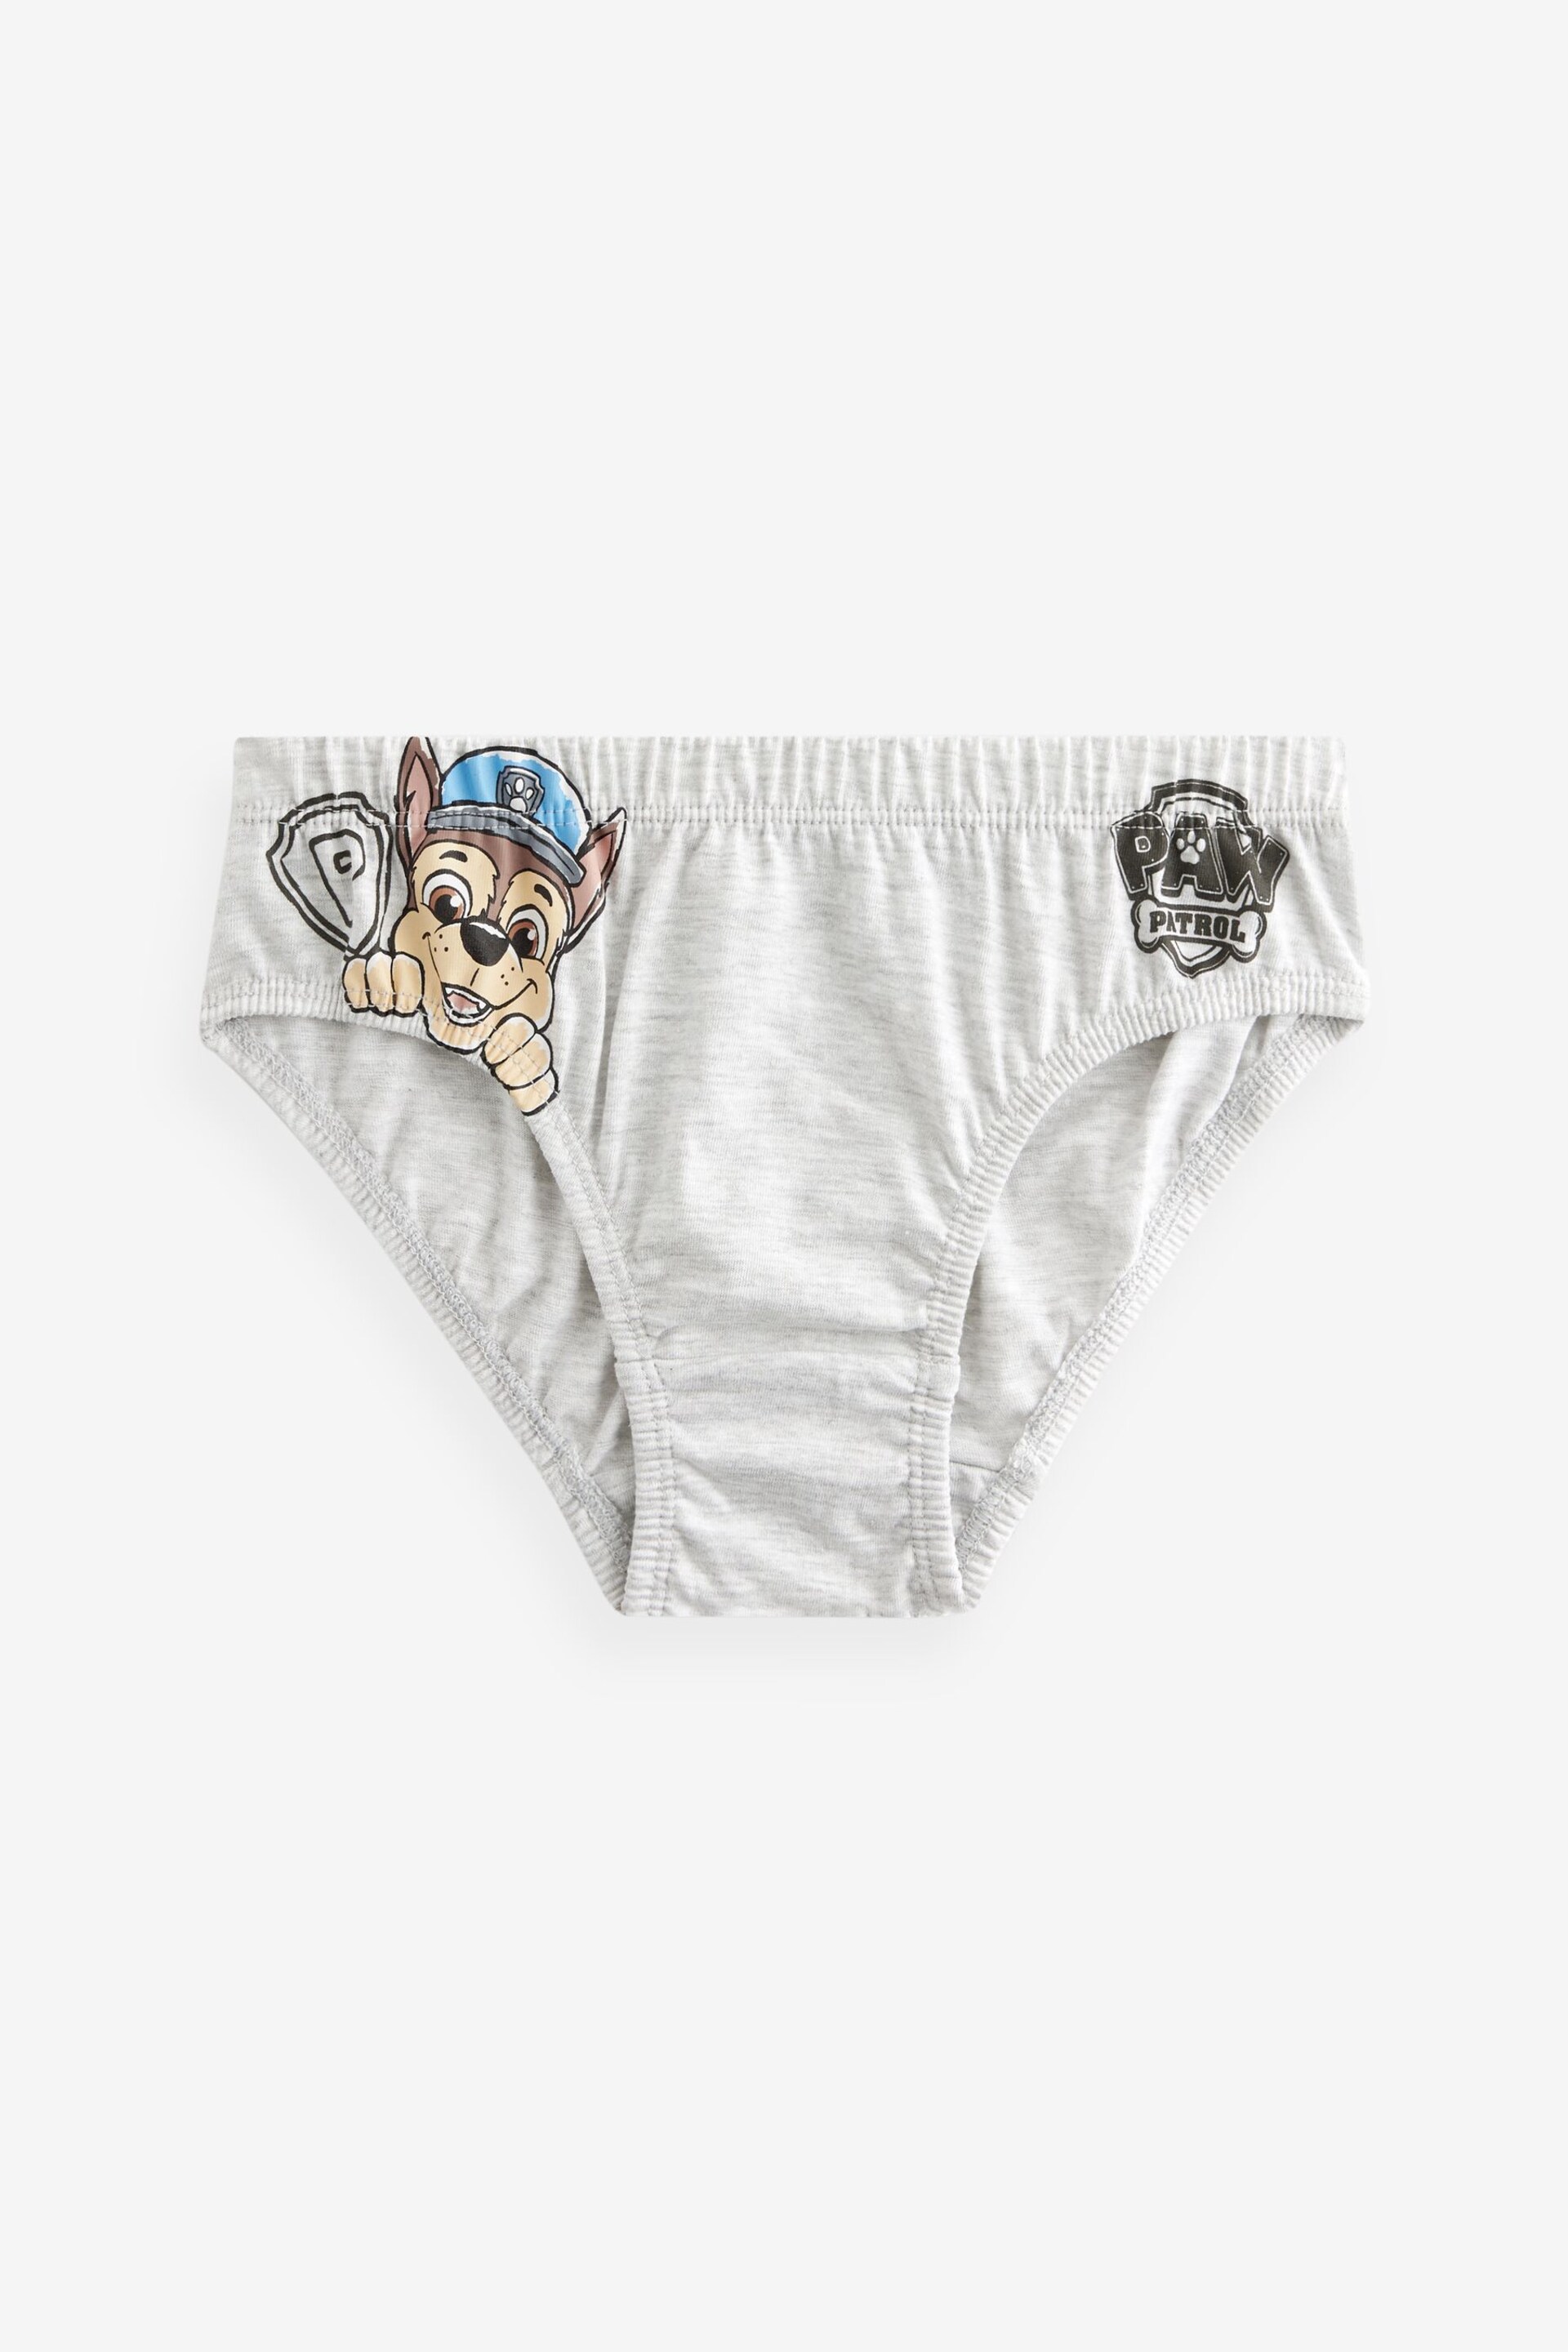 Paw Patrol Briefs 5 Pack (1.5-10yrs) - Image 7 of 8